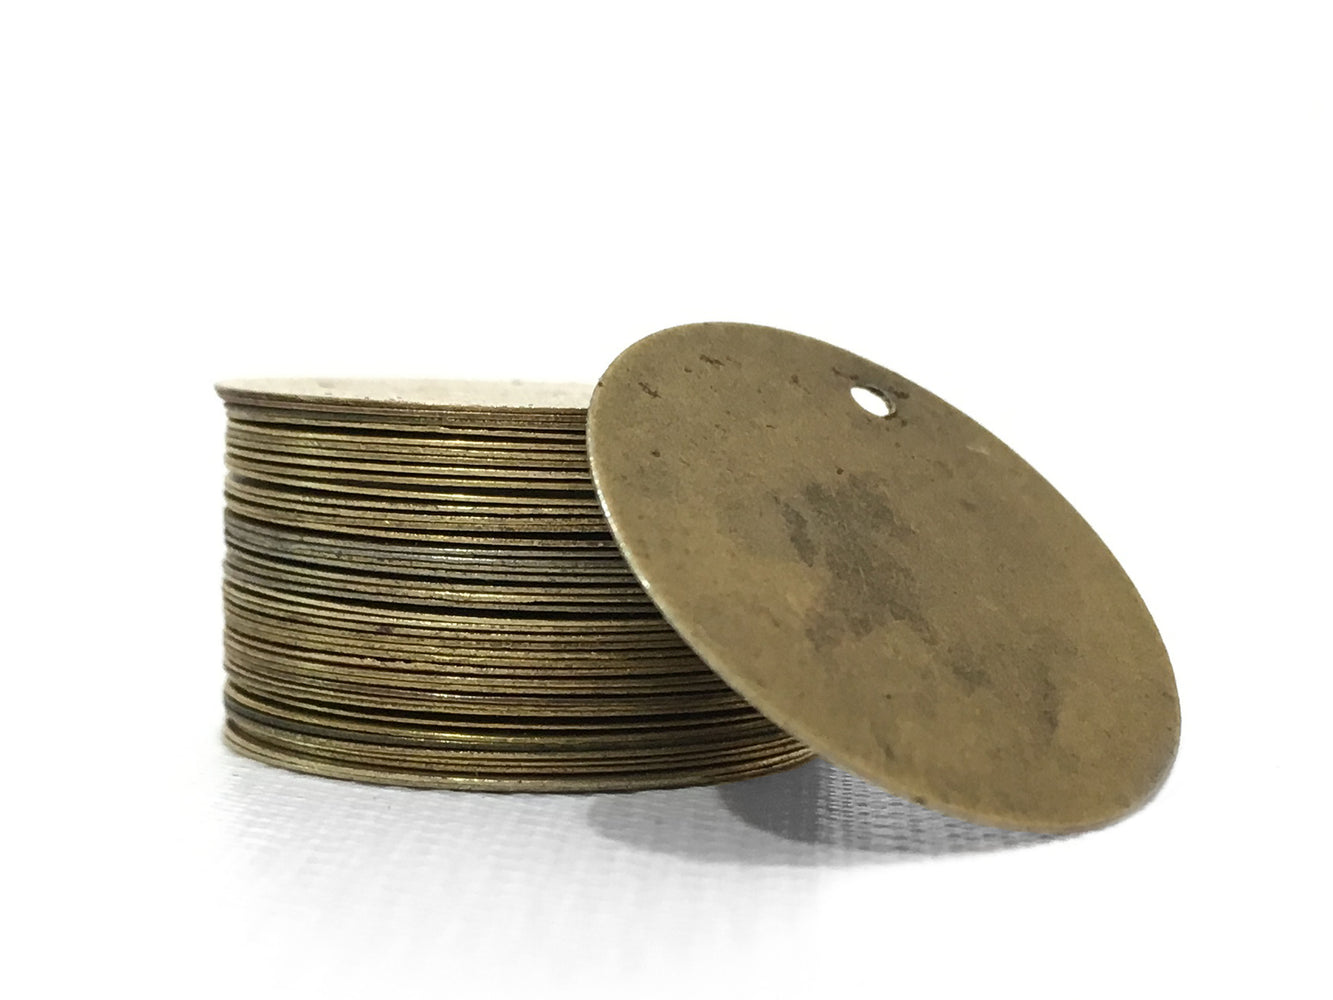 200 Antique Bronze Tone 13/16 inch Metal Blanks Round Metal Stamping Blank and Charms 20mm Diameter